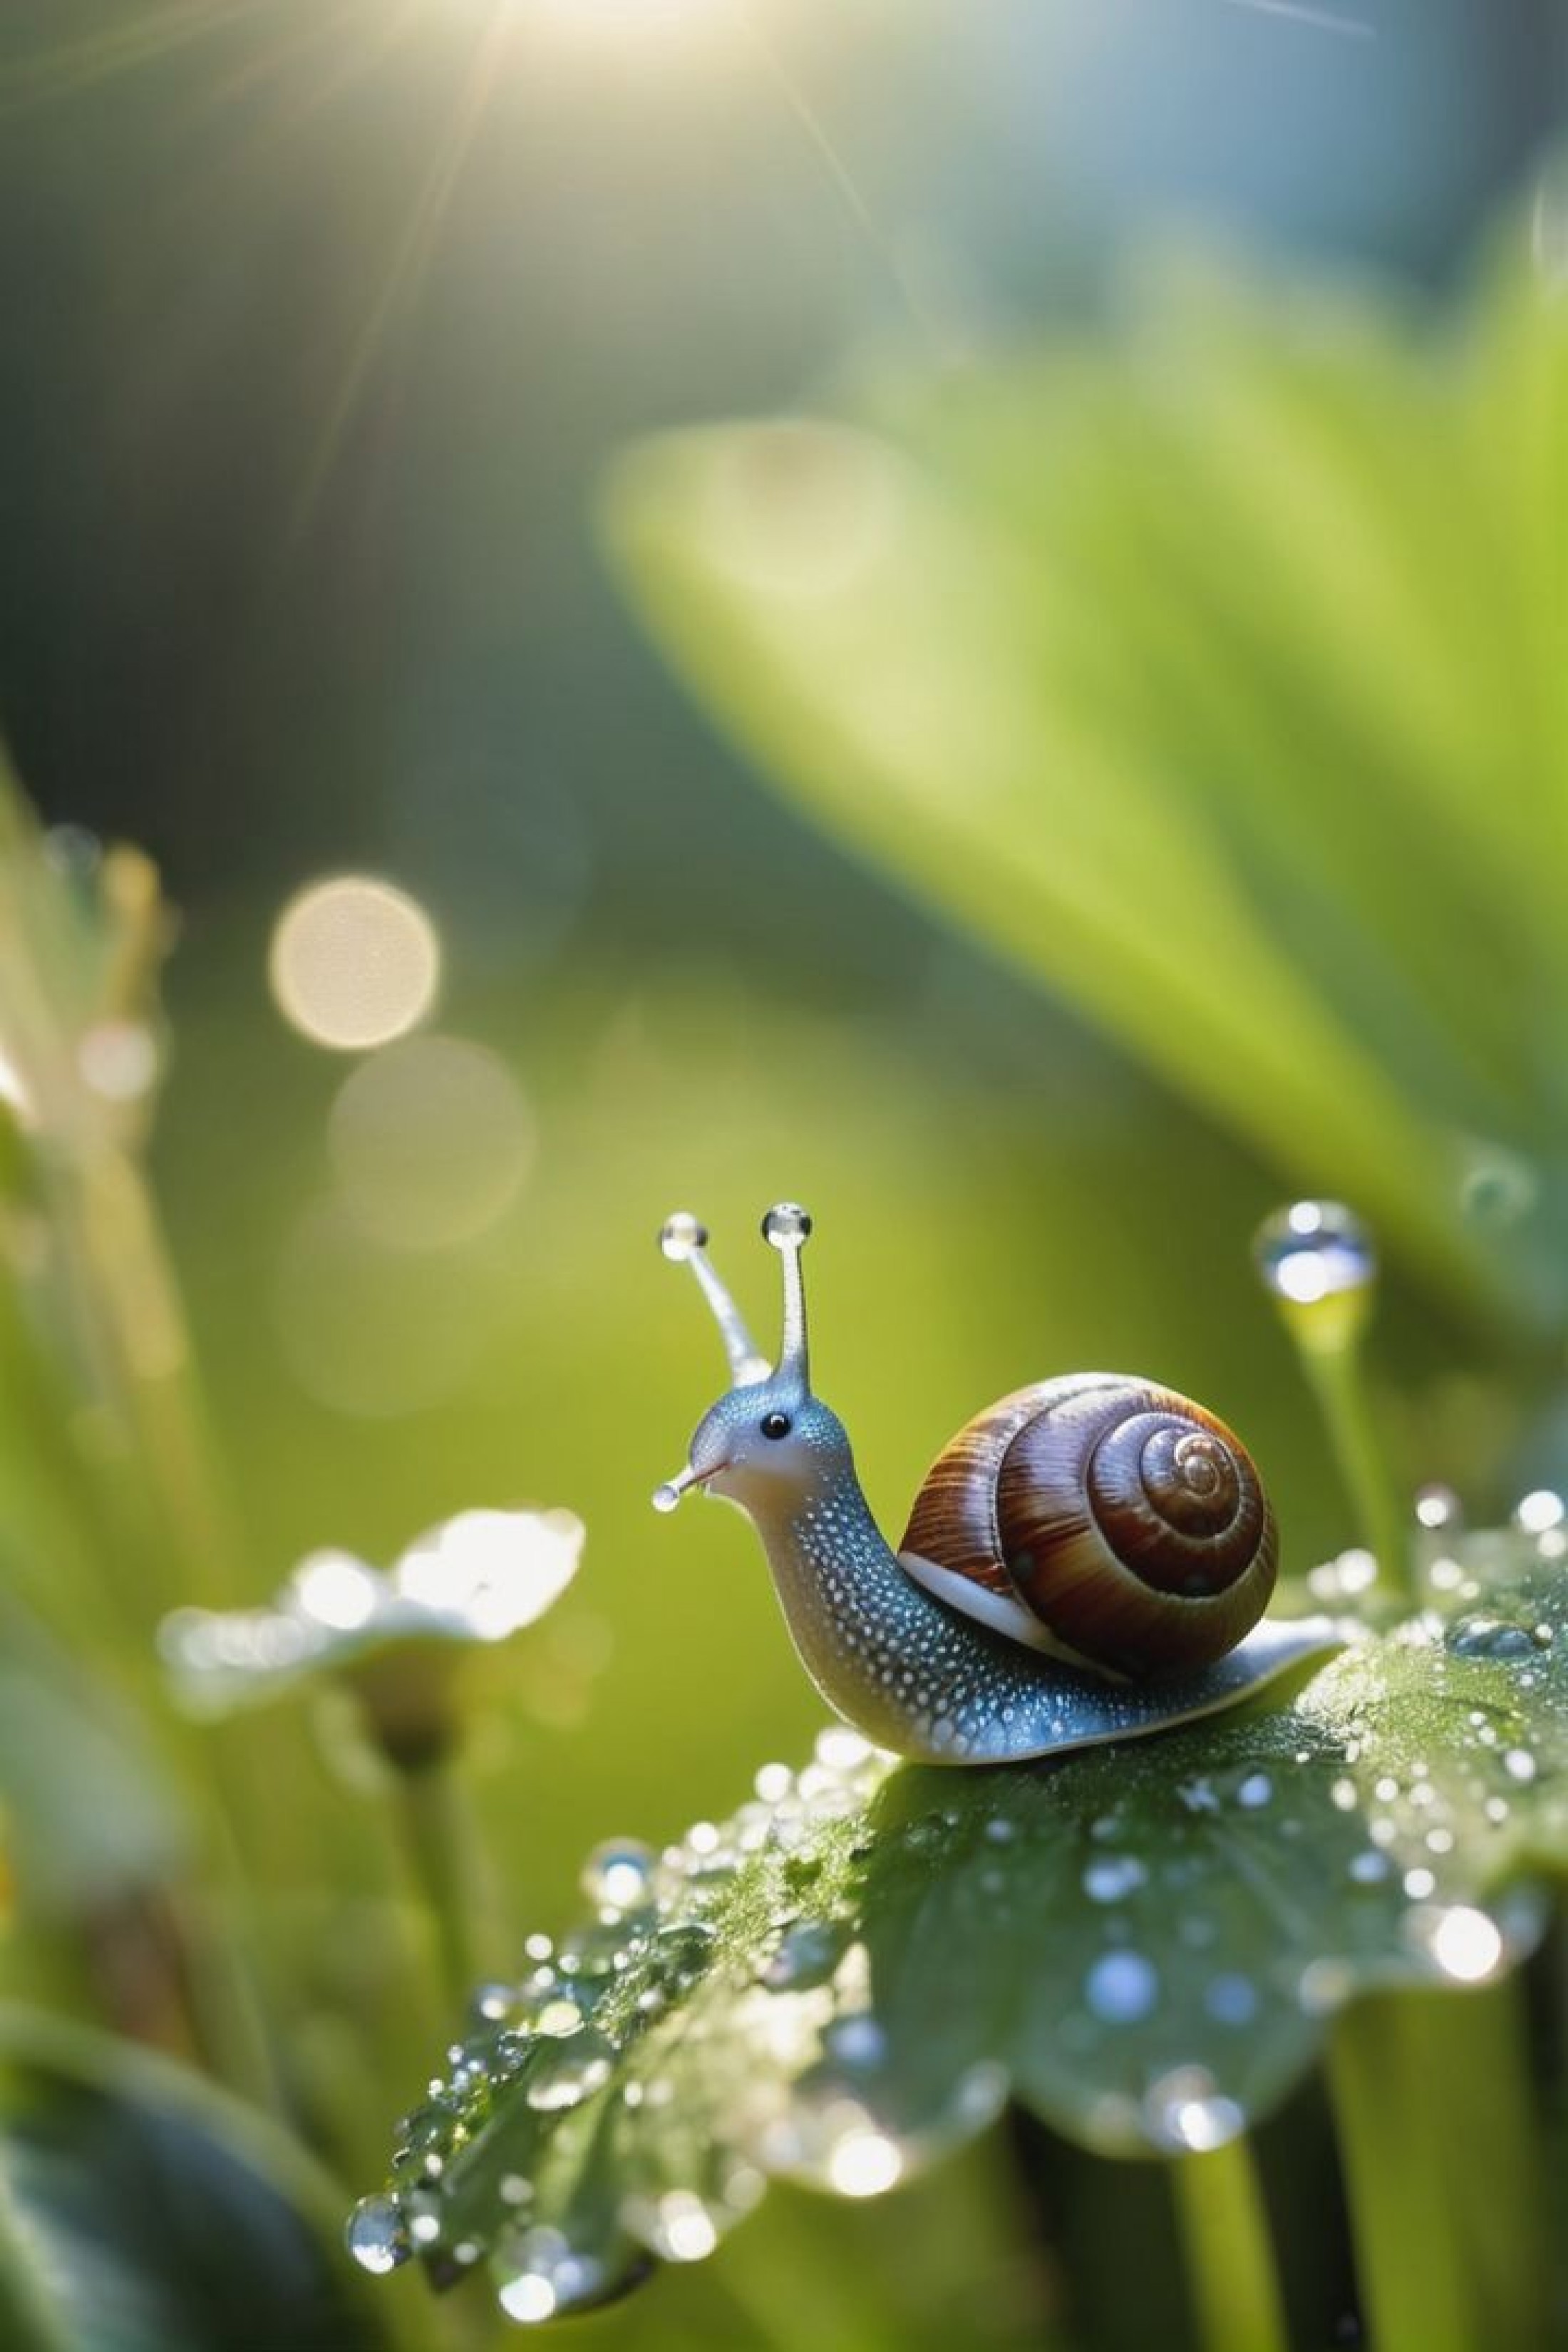 A whimsical sight of a tiny fairy riding atop a miniature snail through a dew-kissed garden, the morning sunlight catching...